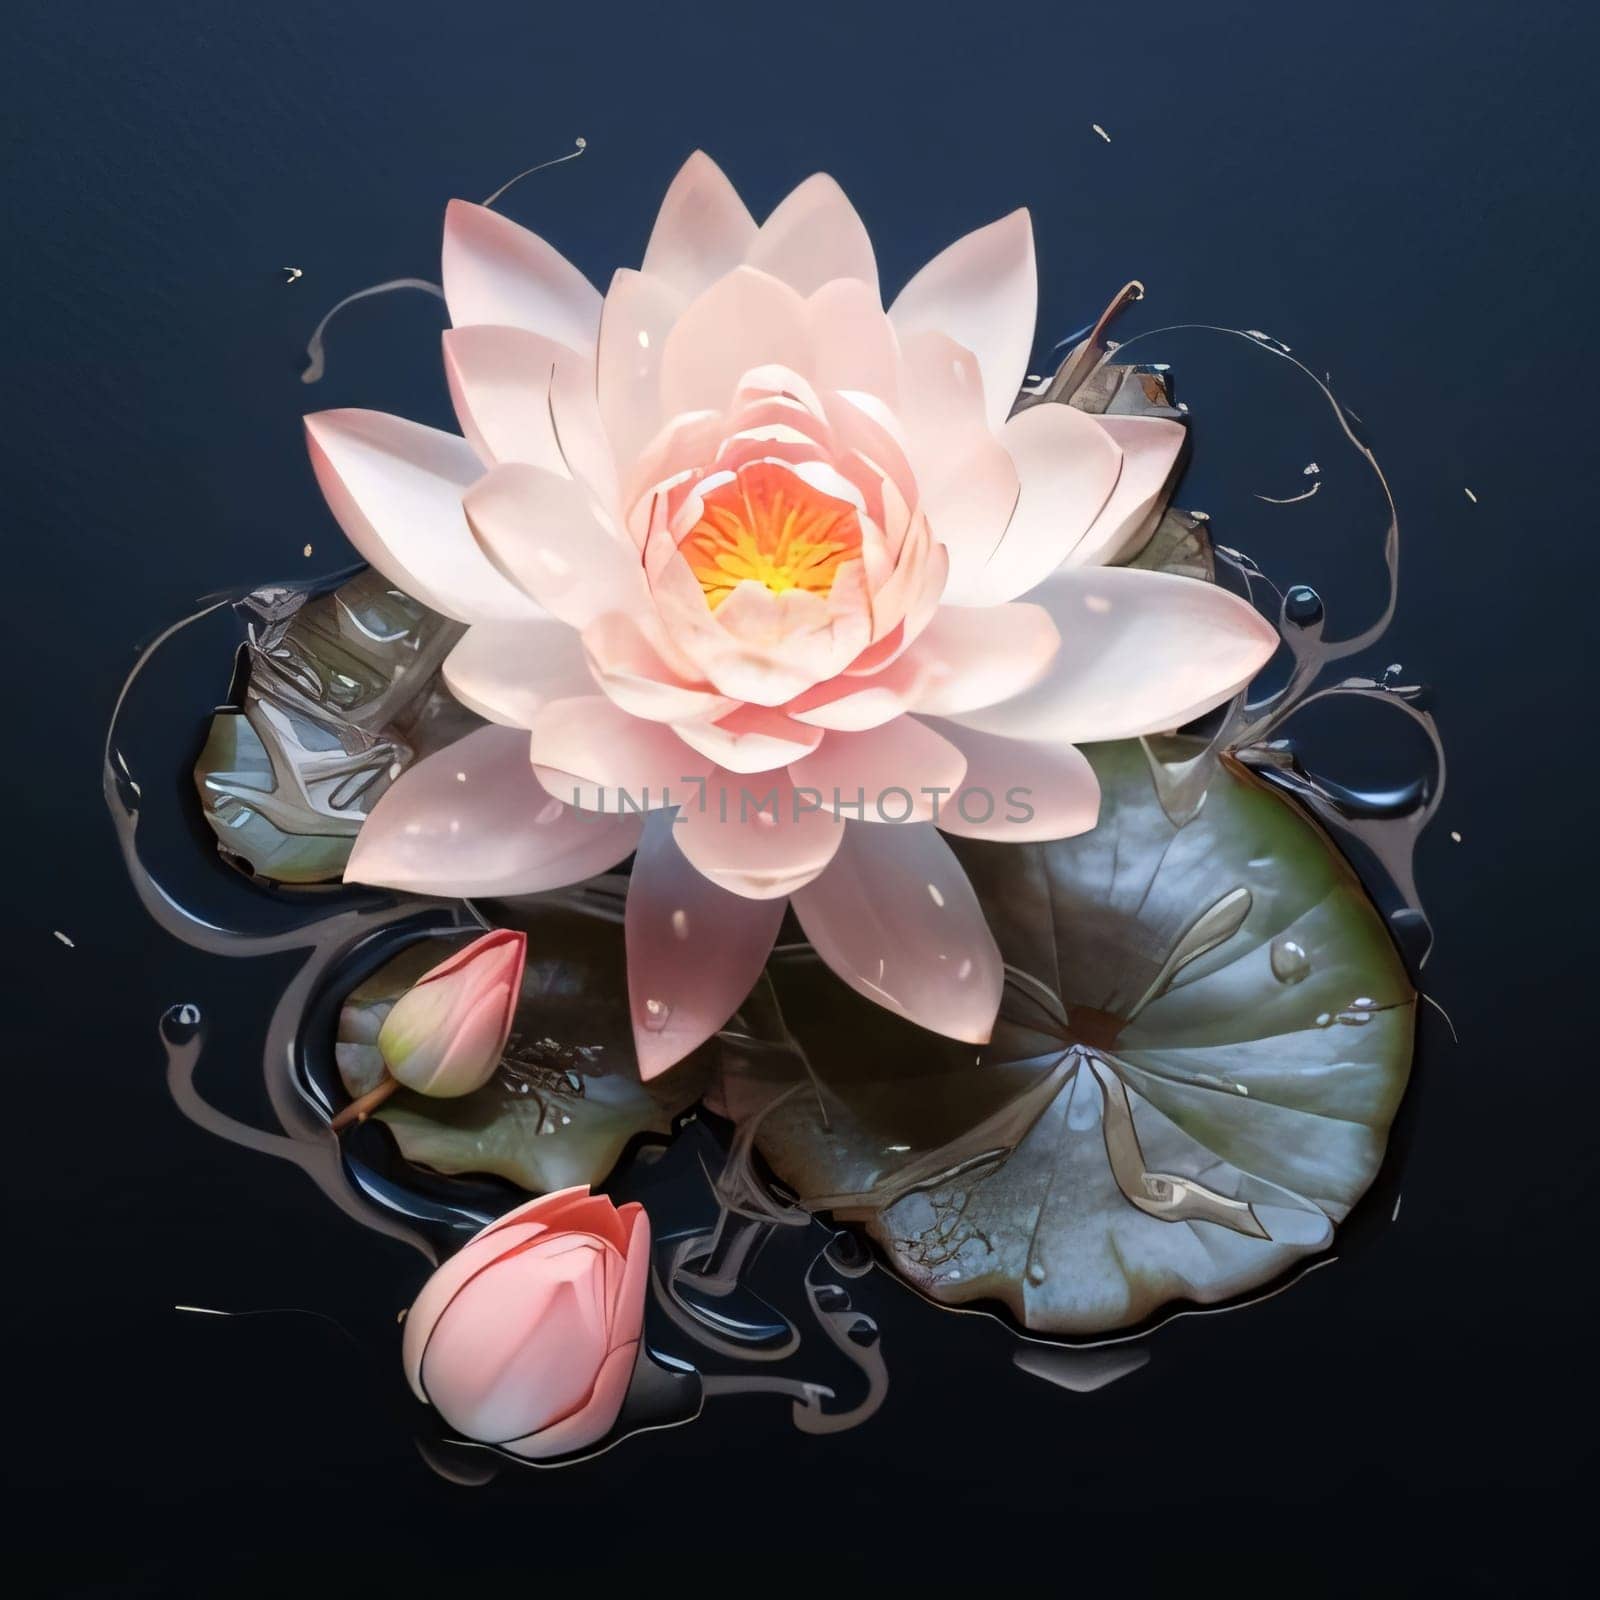 White pink water lily on water, green leaves all around. Flowering flowers, a symbol of spring, new life. by ThemesS